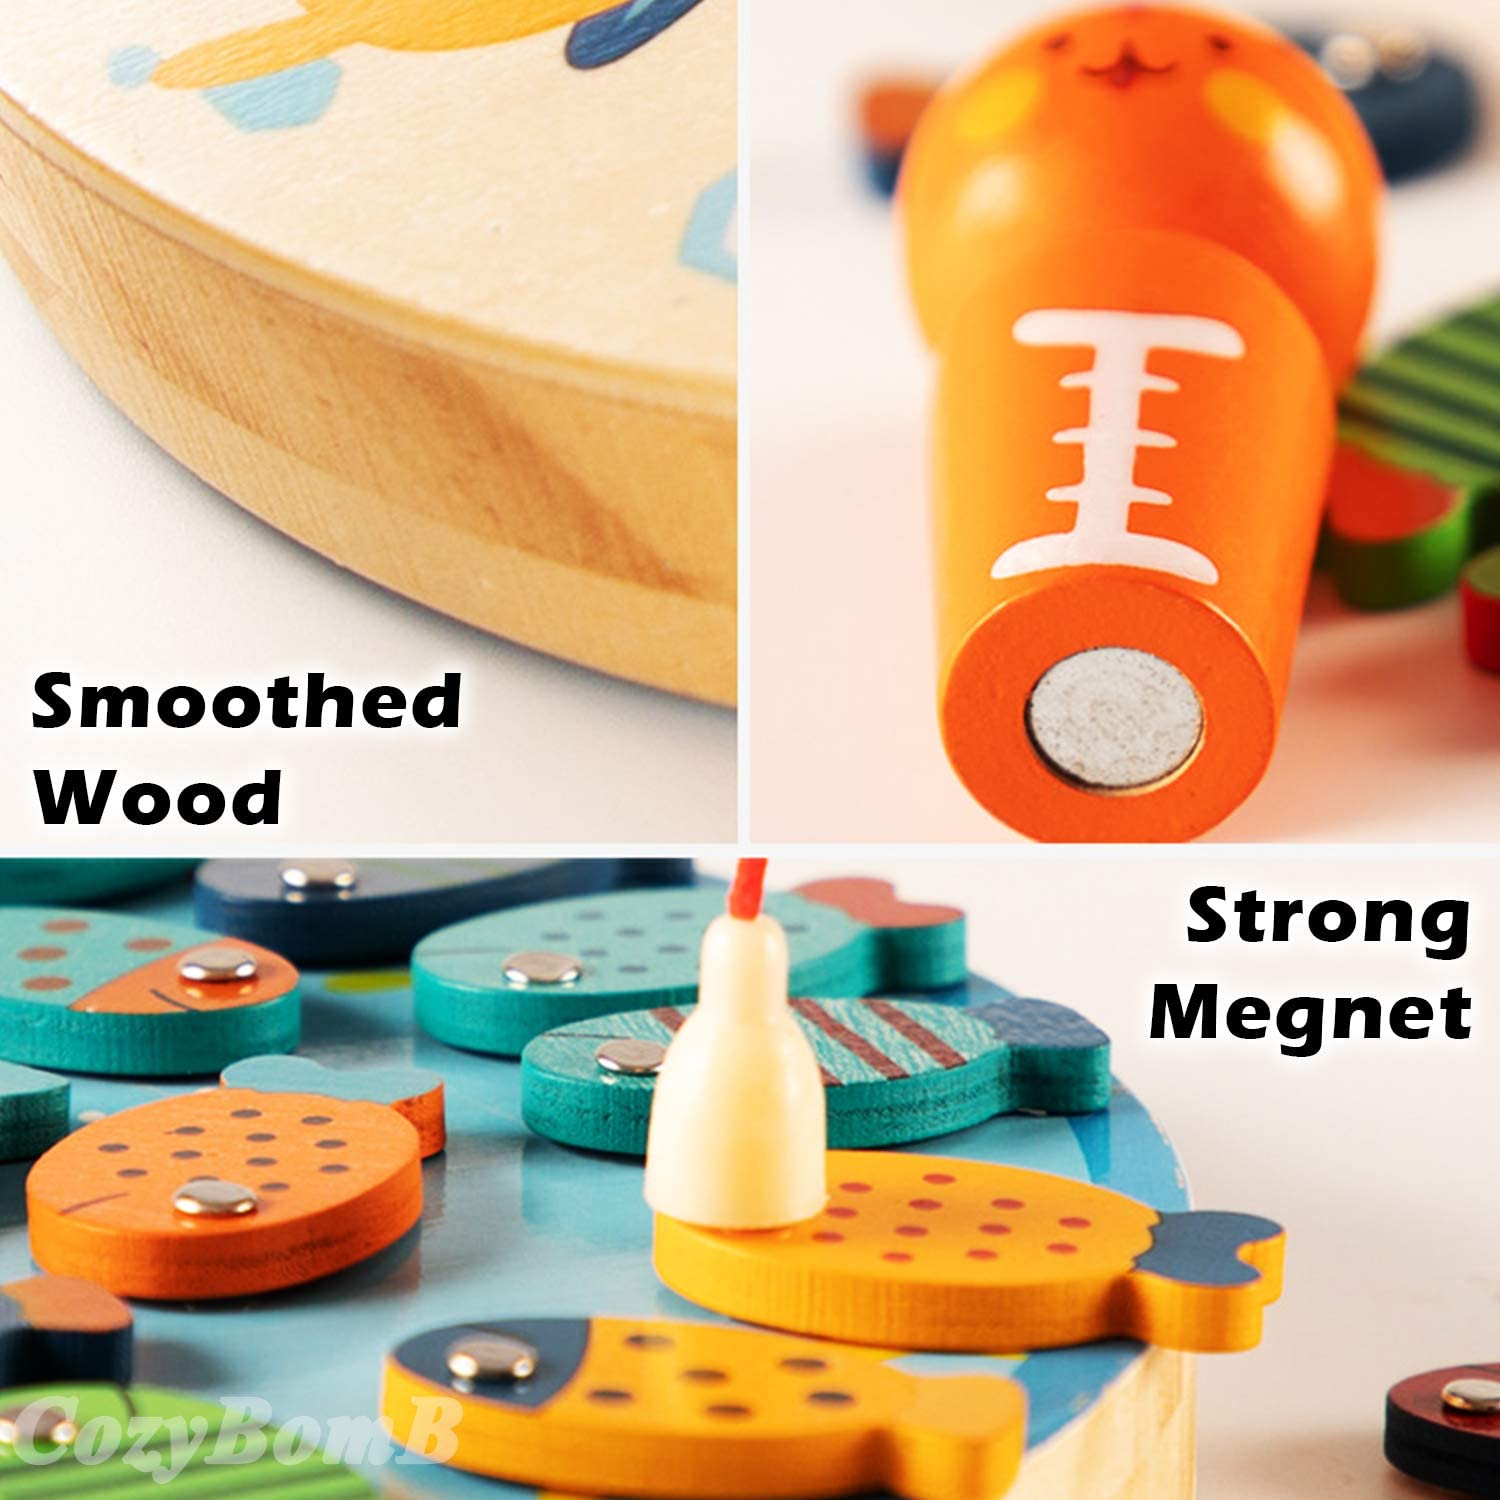 https://bigbigmart.com/wp-content/uploads/2021/12/CozyBomB-Magnetic-Wooden-Fishing-Game-Toy-for-Toddlers-Alphabet-Fish-Catching-Counting-Preschool-Board-Games-Toys-for-3-4-5-Year-Old-Girl-Boy-Kids-Birthday-Learning-Education-Math-with-Magnet-Poles7.jpg